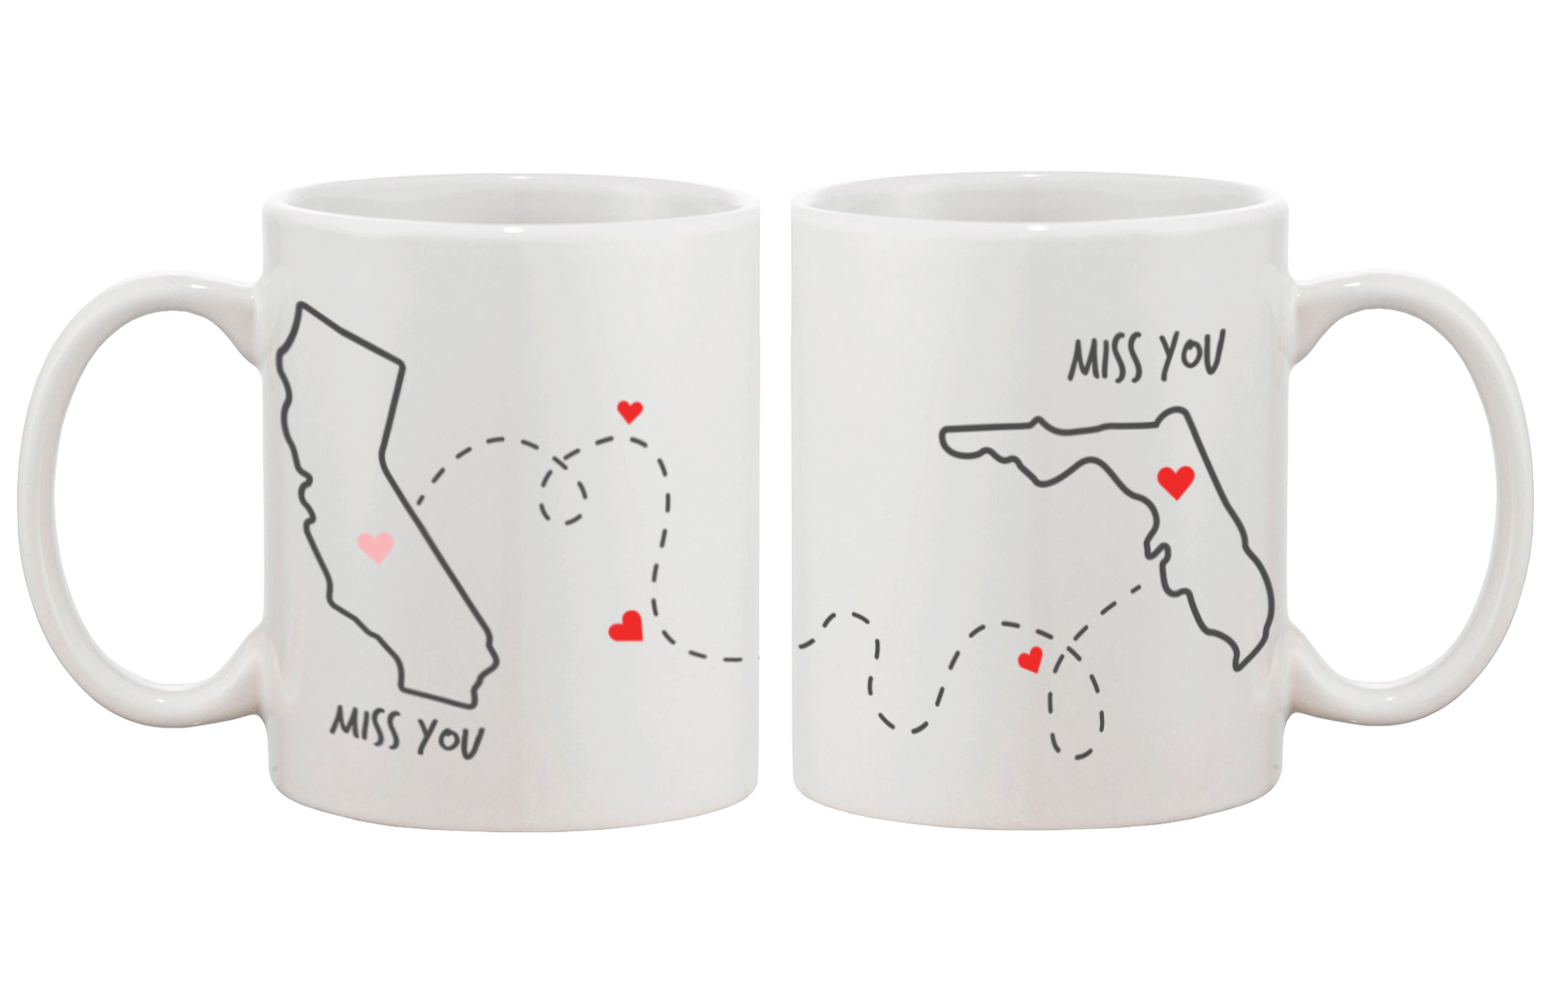 Matching Couple Mugs For The Love-Struck Couple - Times of India (January,  2024)